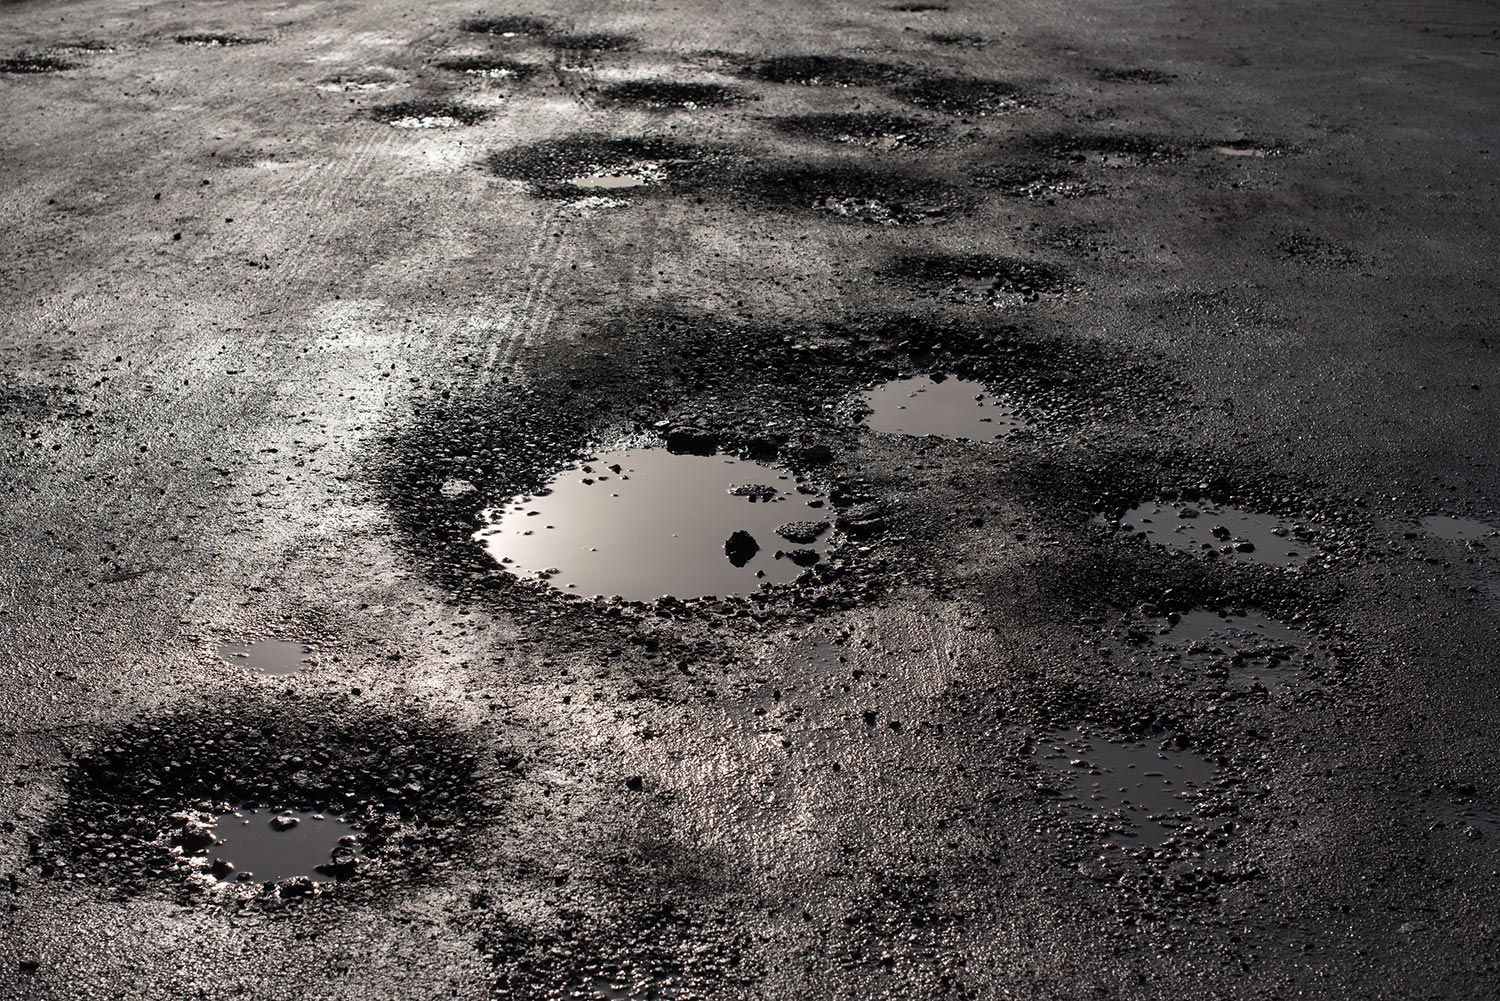 Potholes in the road looking like alien craters